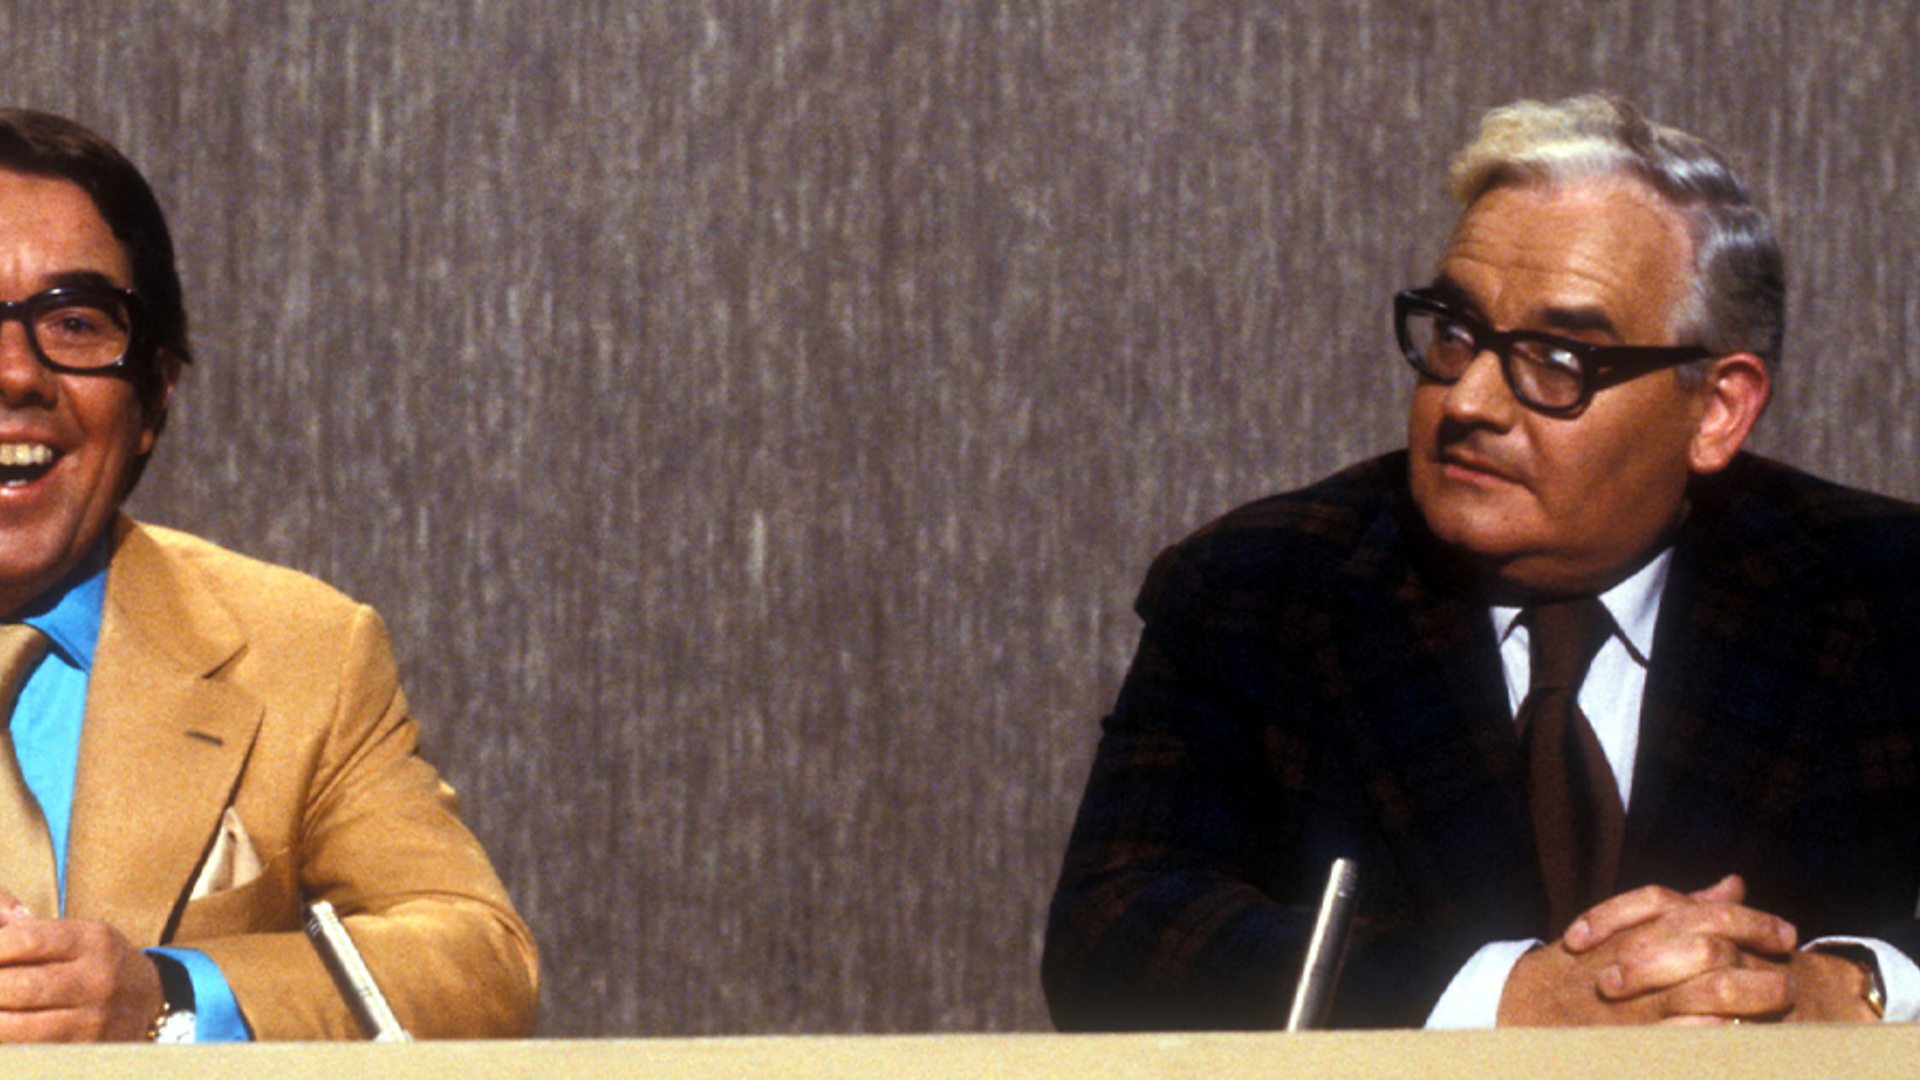 Uproar over 'racist' Two Ronnies clip | UK | News | Express.co.uk